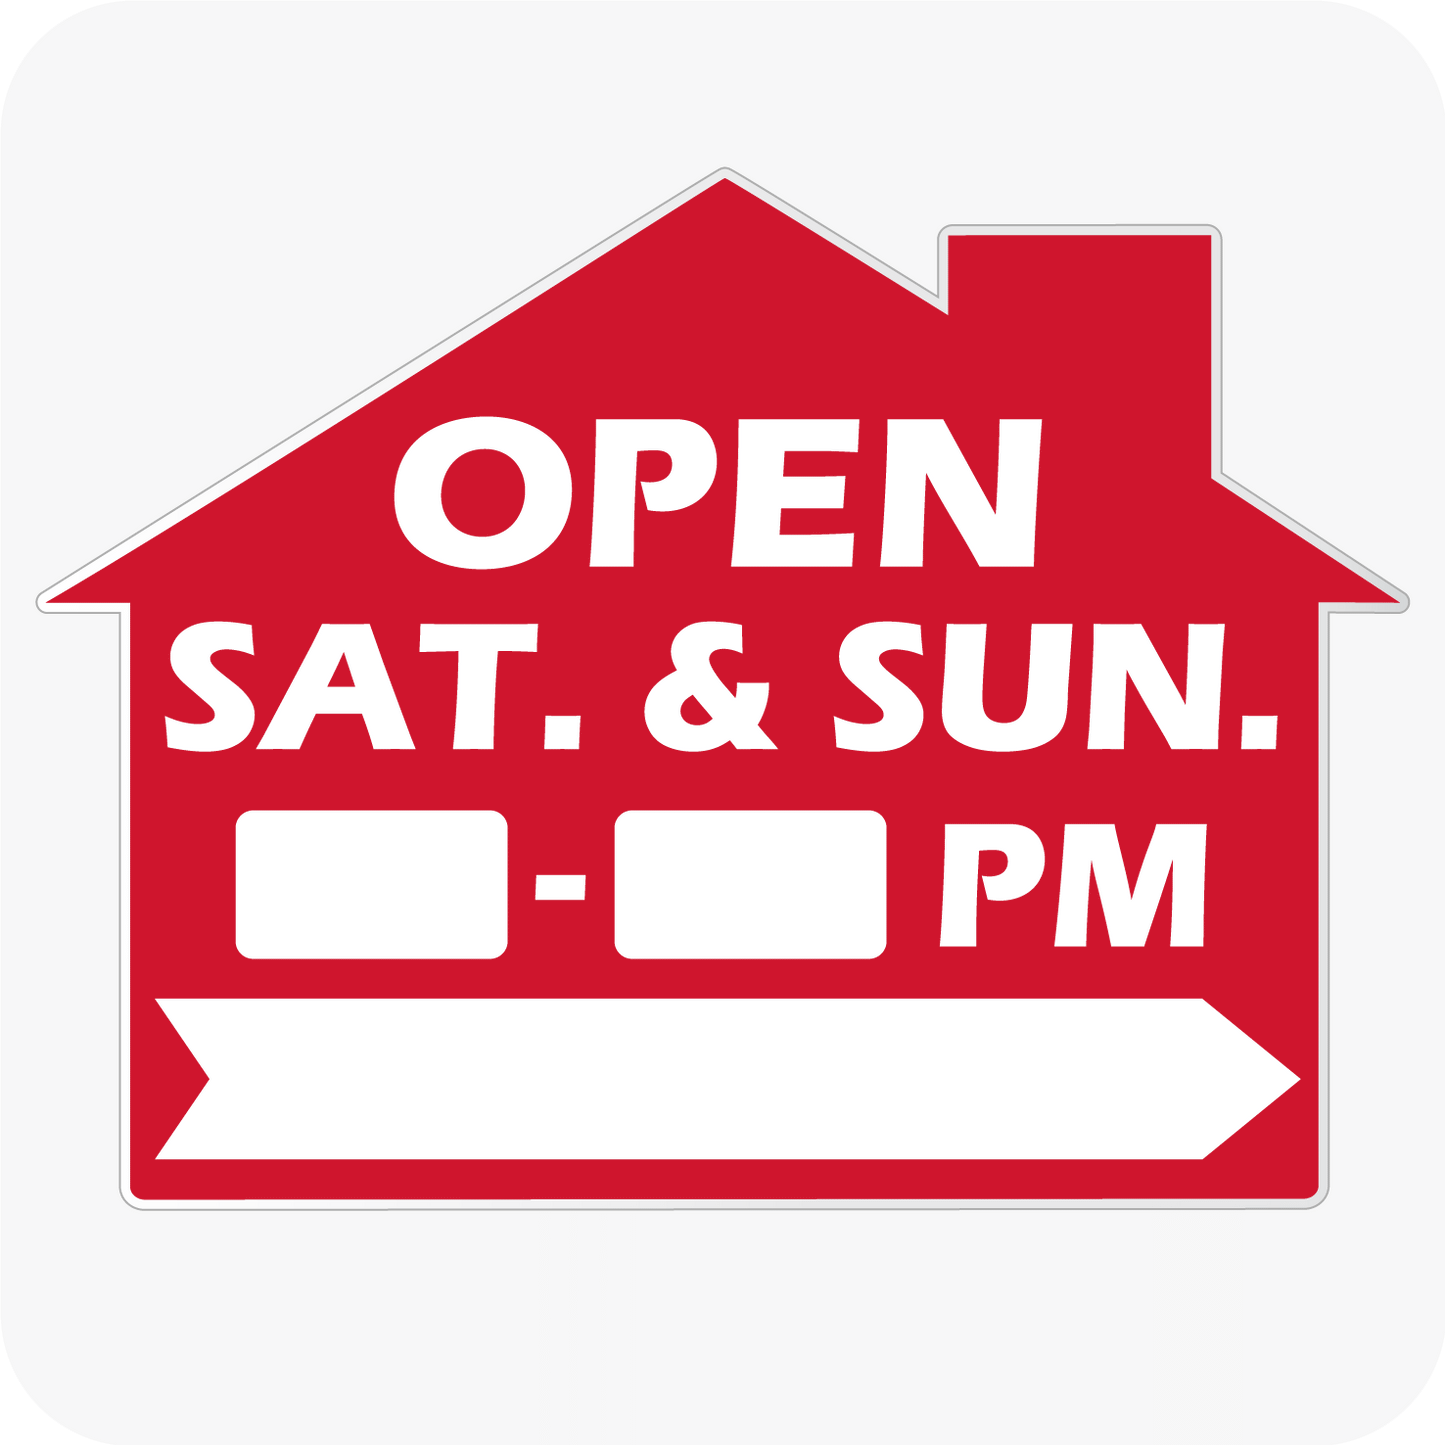 Open House Saturday and Sunday w/ Hours - House Shaped Sign 18 x 24